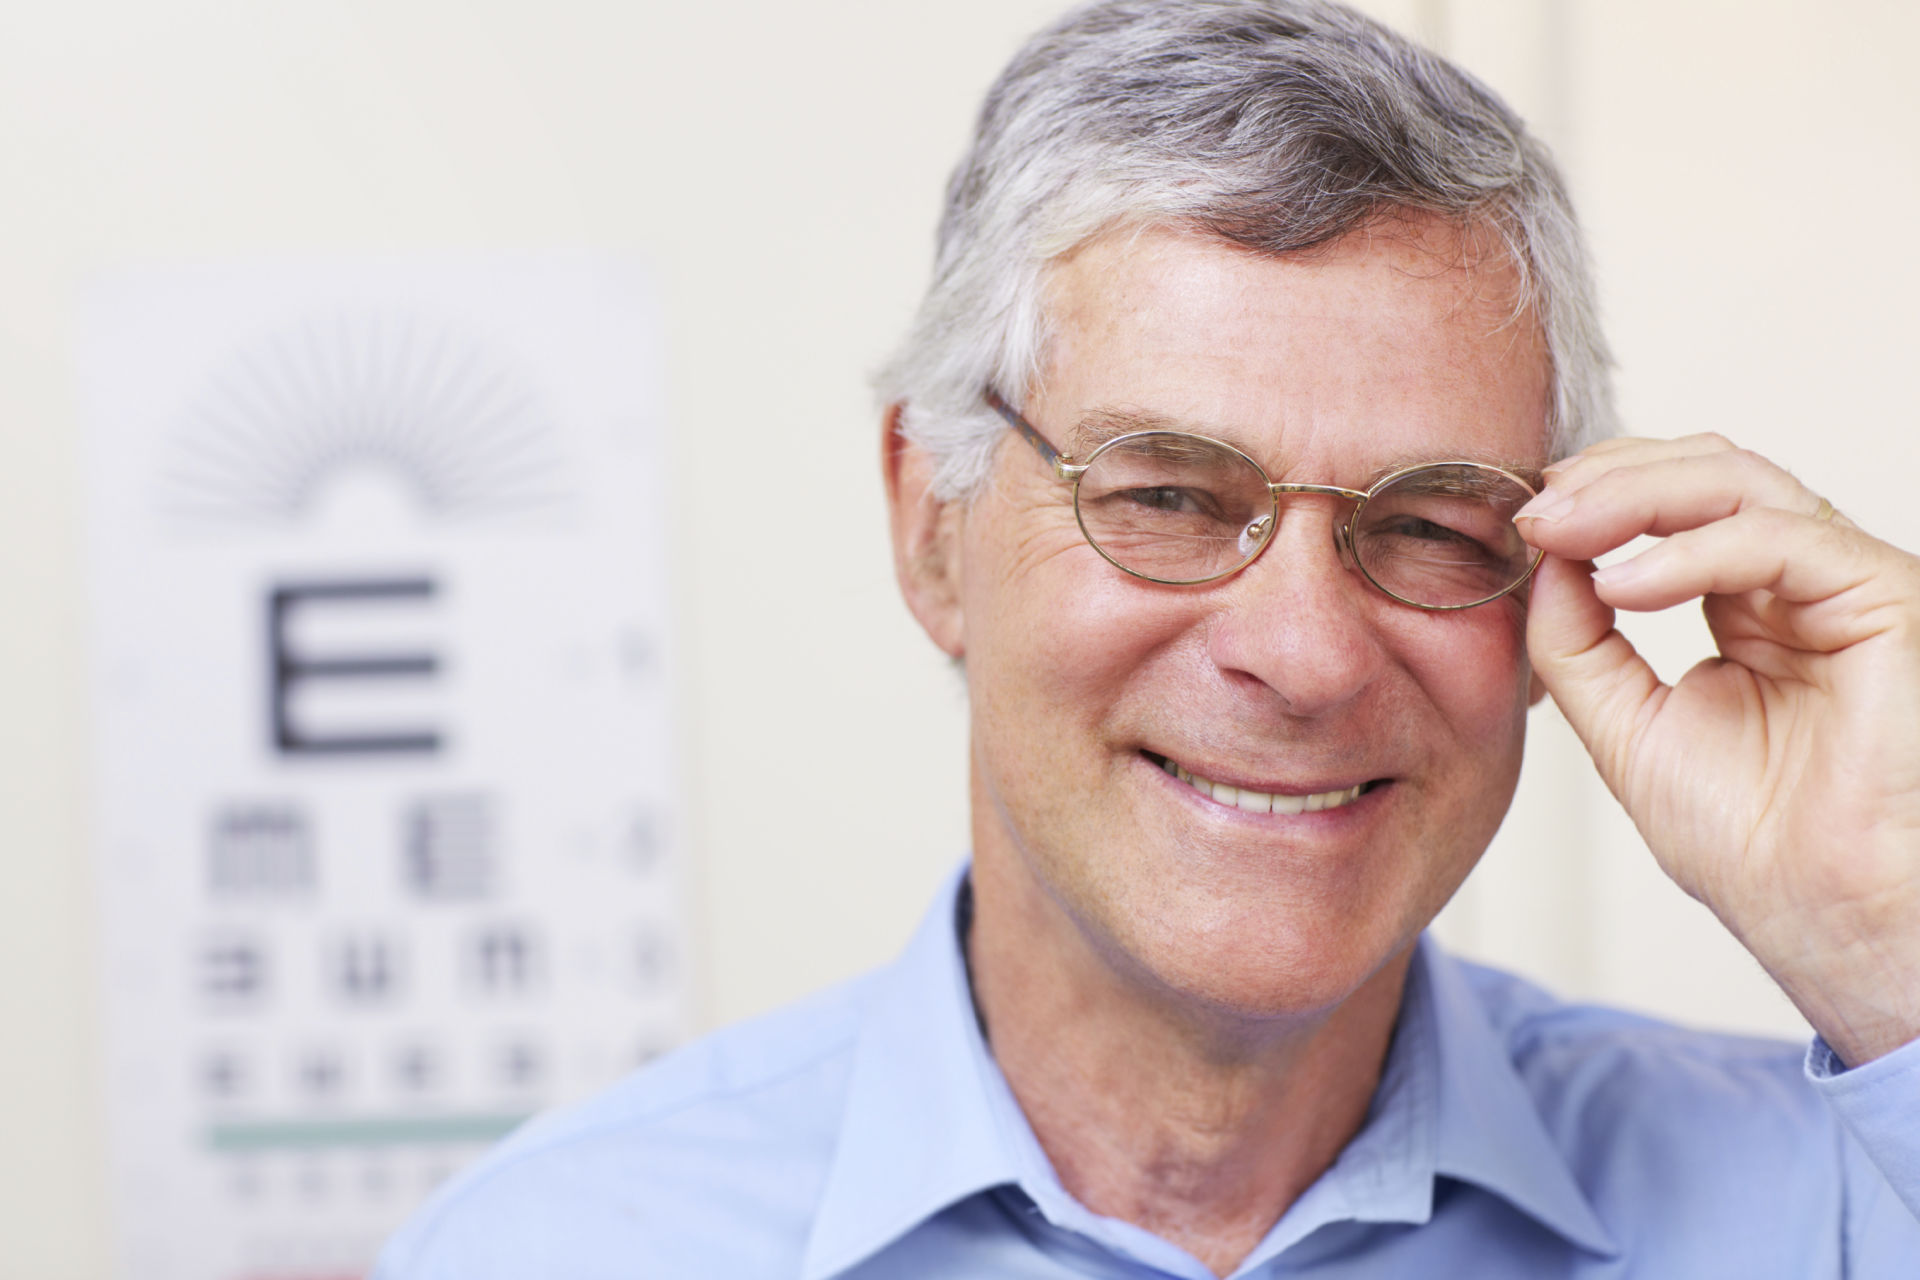 5 Tips to Maintain Healthy Eyes